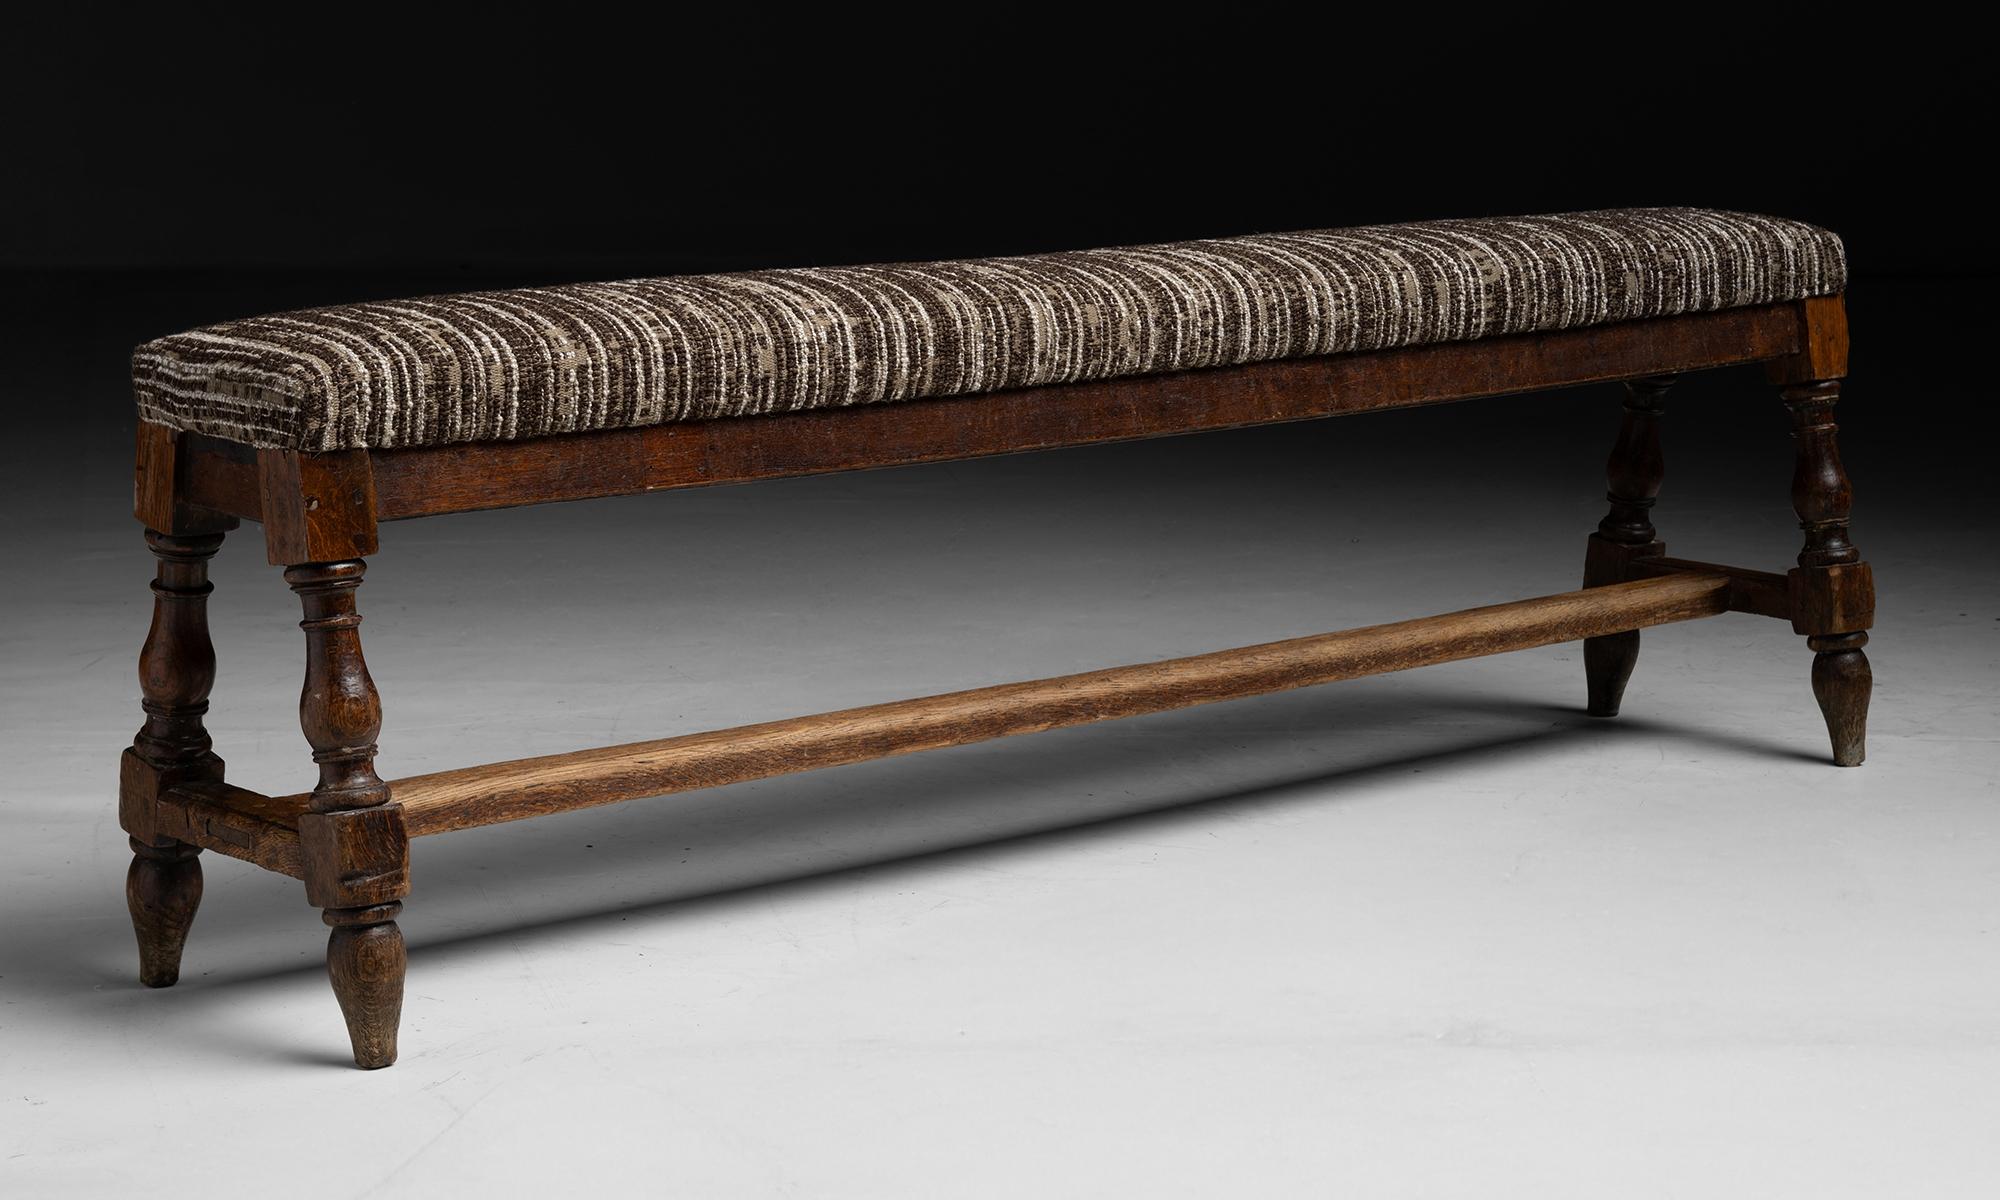 Hall Bench in Wool Blend
England circa 1890
Antique frame with turned legs, newly upholstered in wool blend by de la Cuona.
76”L x 16”d x 23”h